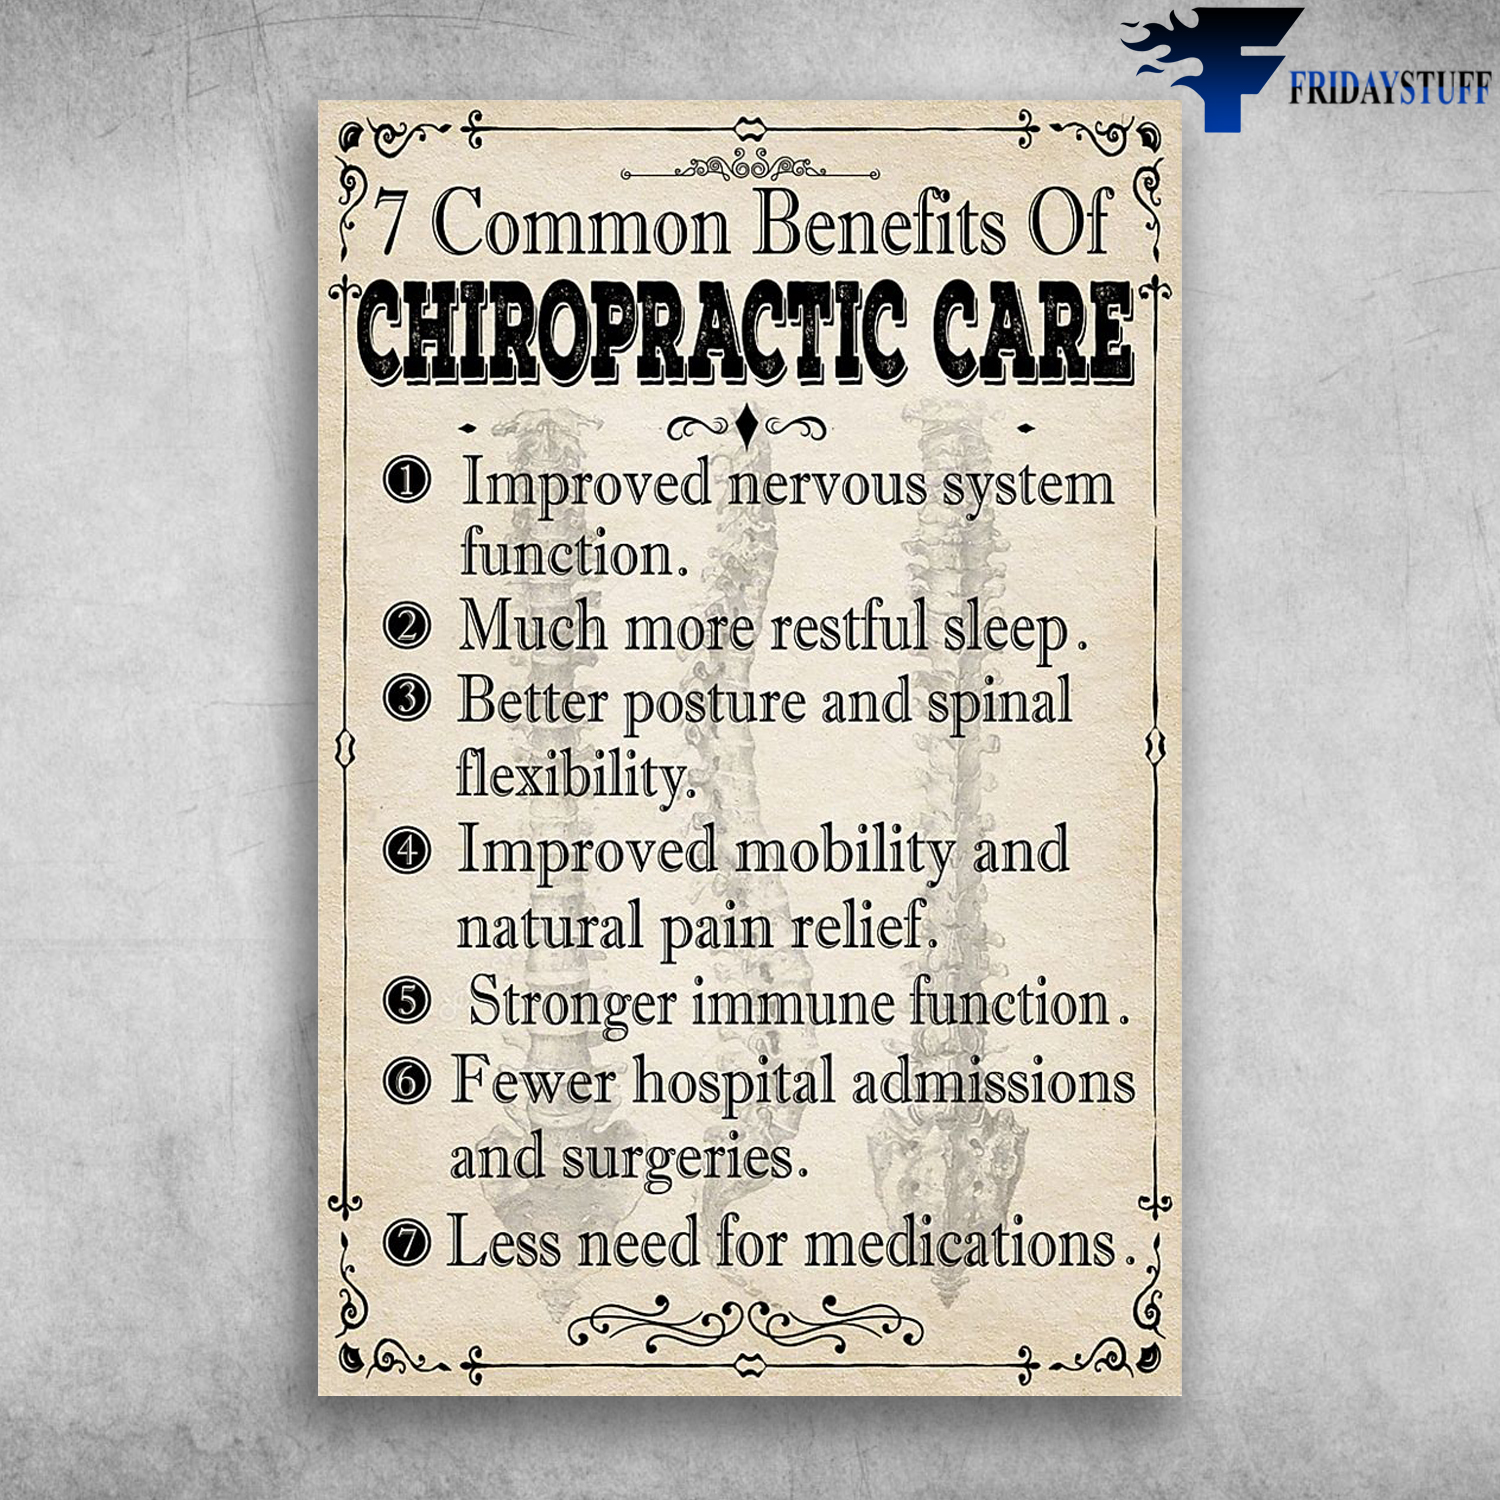 Seven Common Benefits Of Chiropractic Care